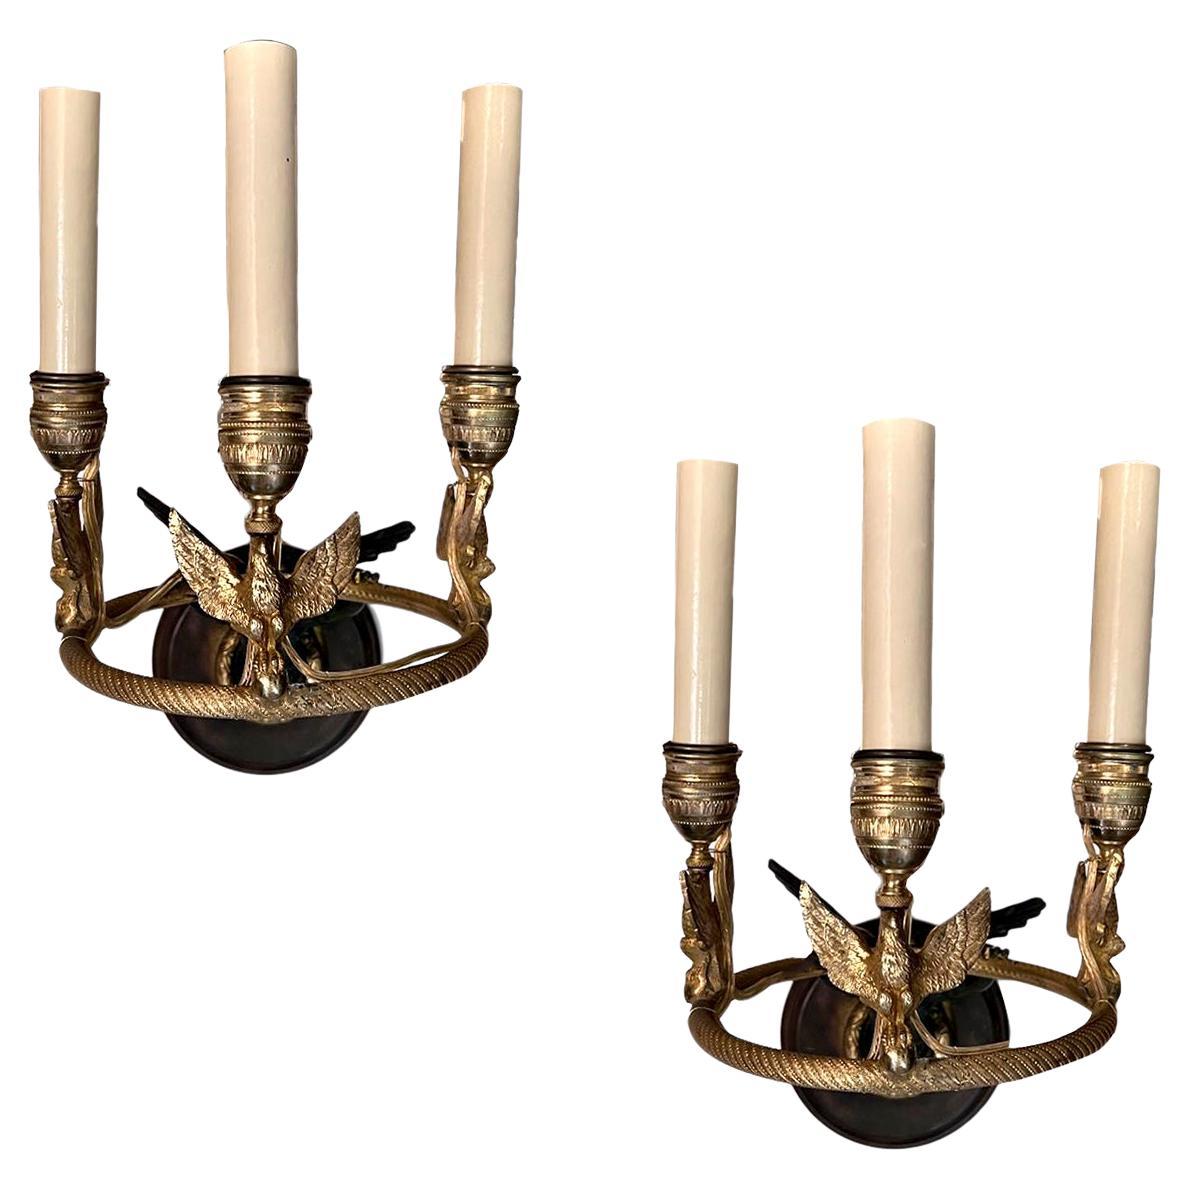 Set of 4 Antique French Empire Sconces For Sale